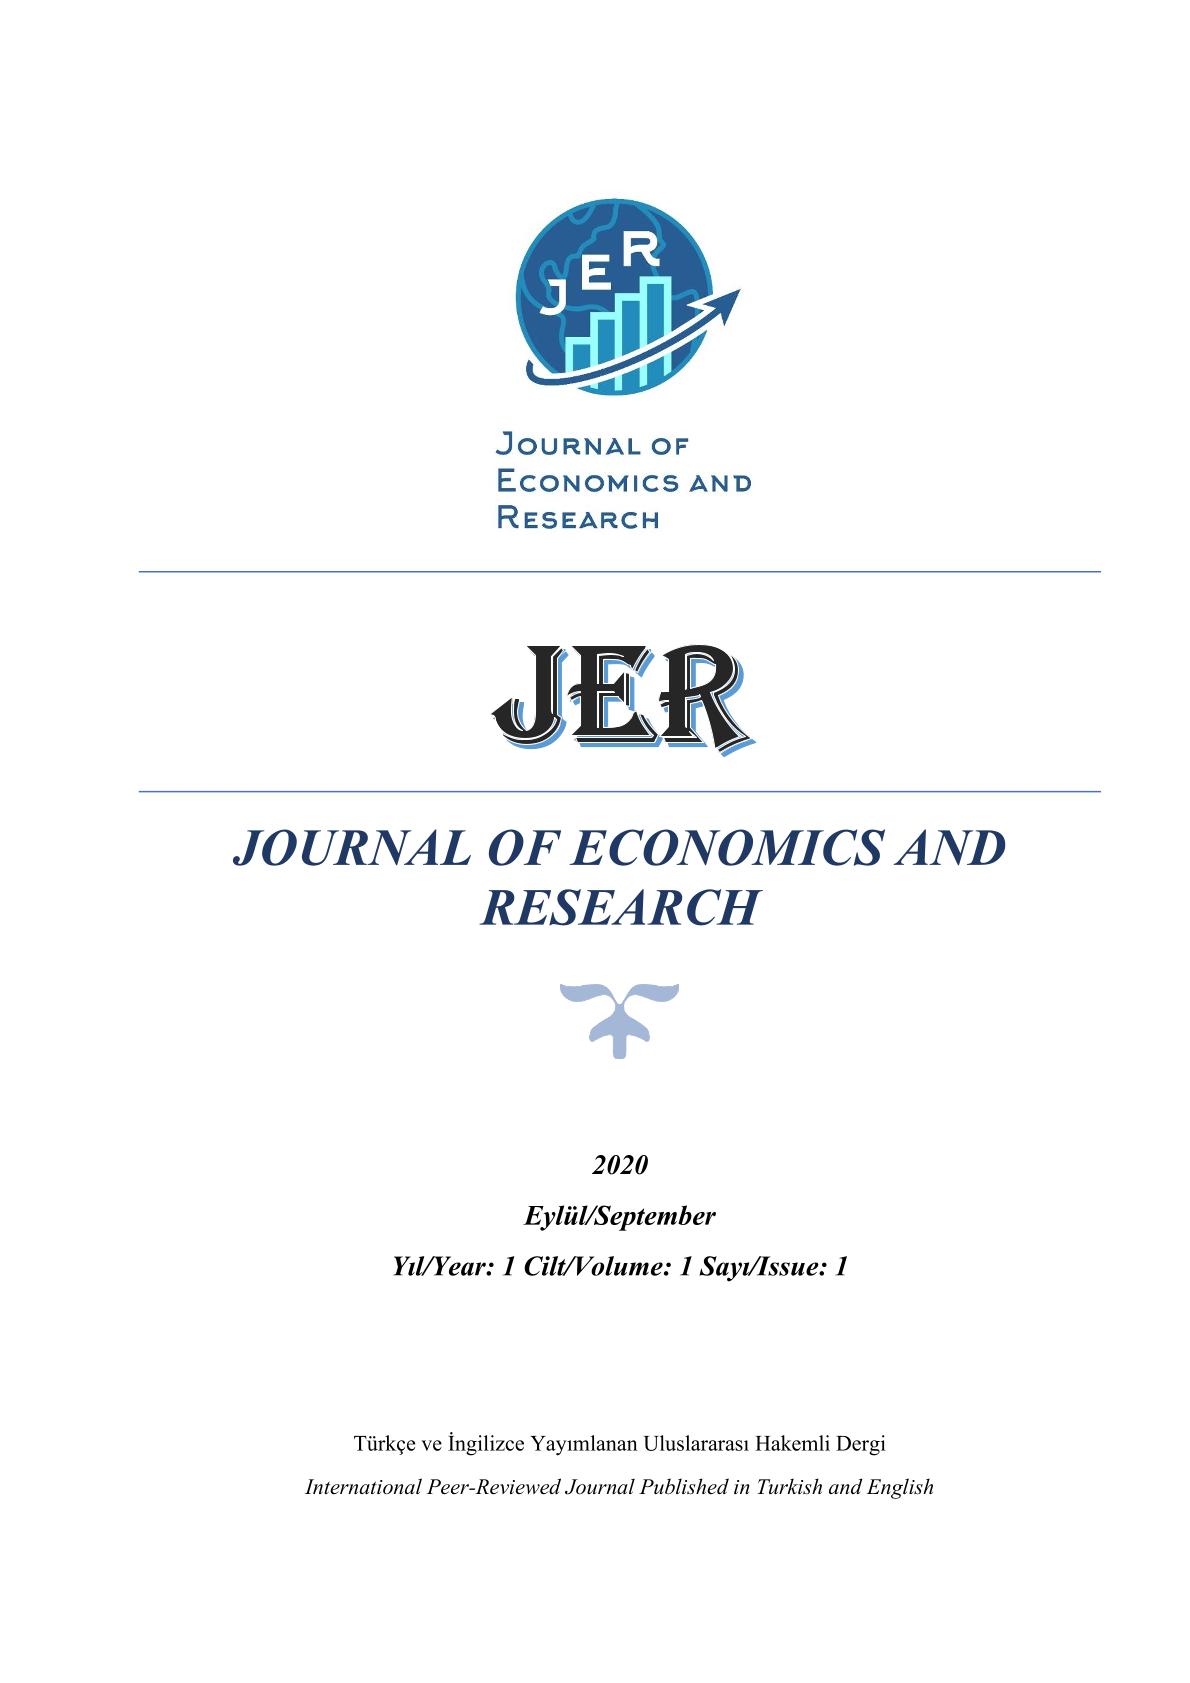 Journal of Economics and Research-Asos İndeks